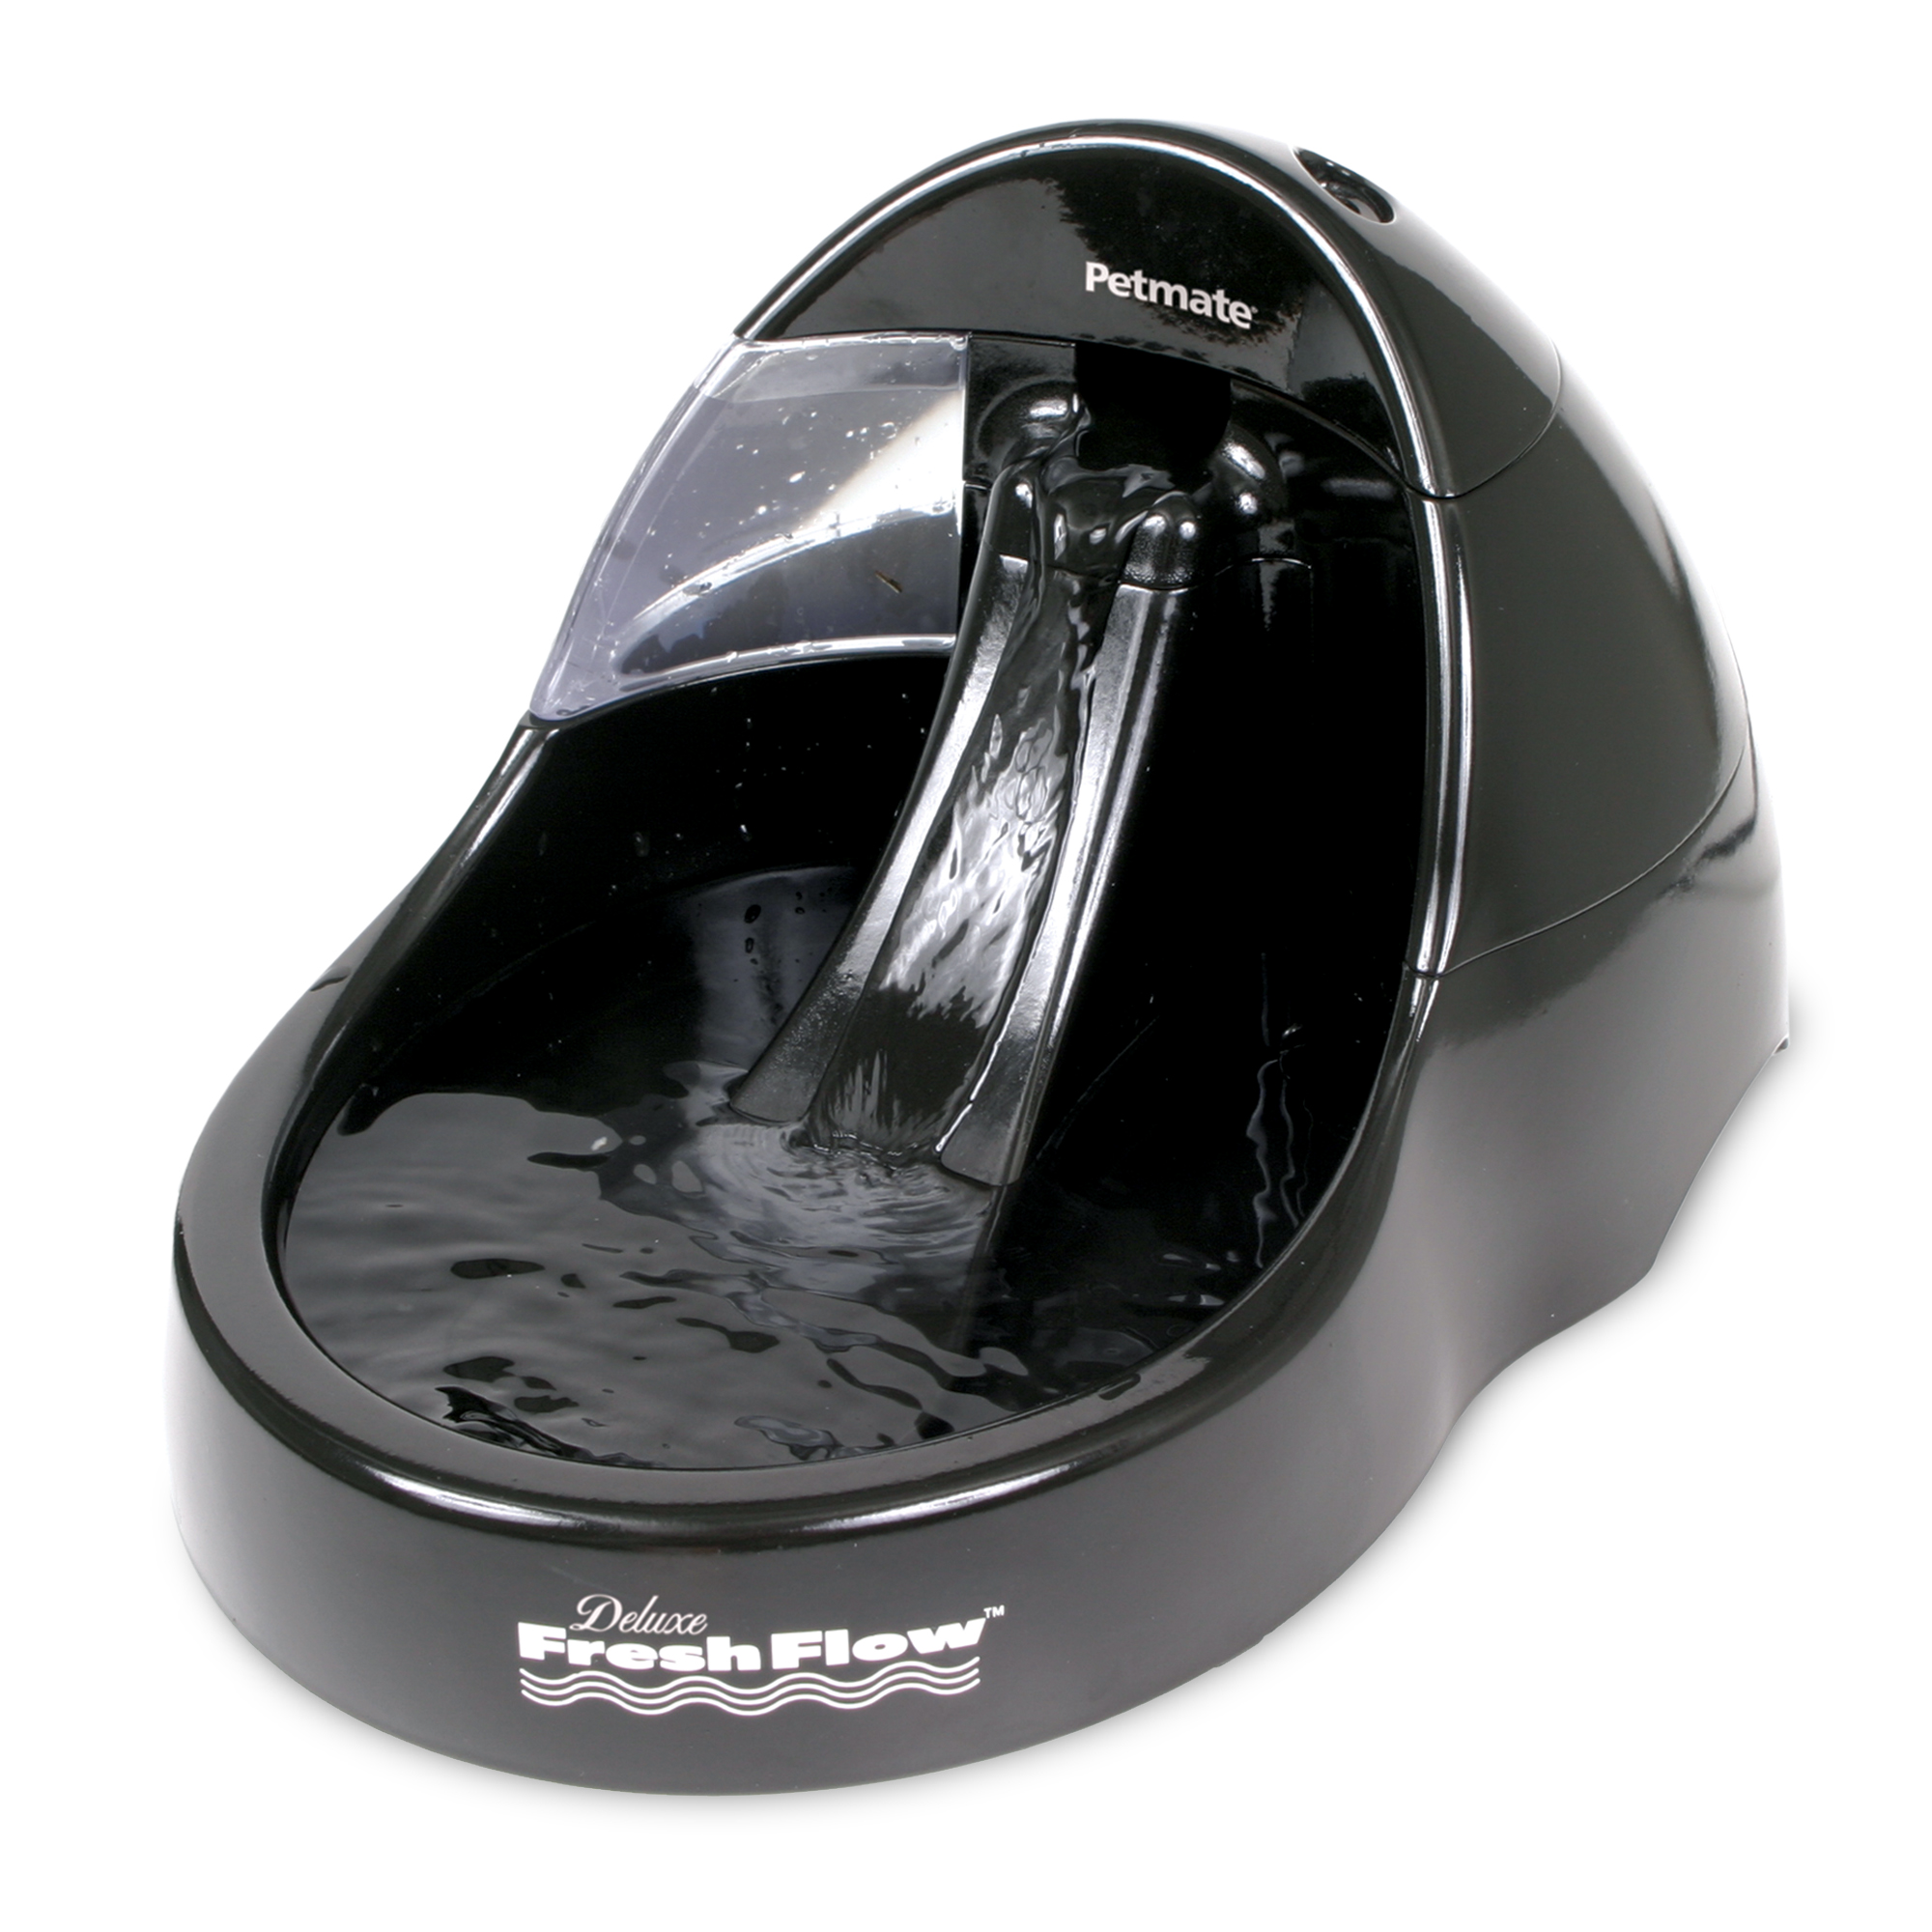 Petmate Deluxe Fresh Flow Purifying Water Pet Fountain - image 1 of 6